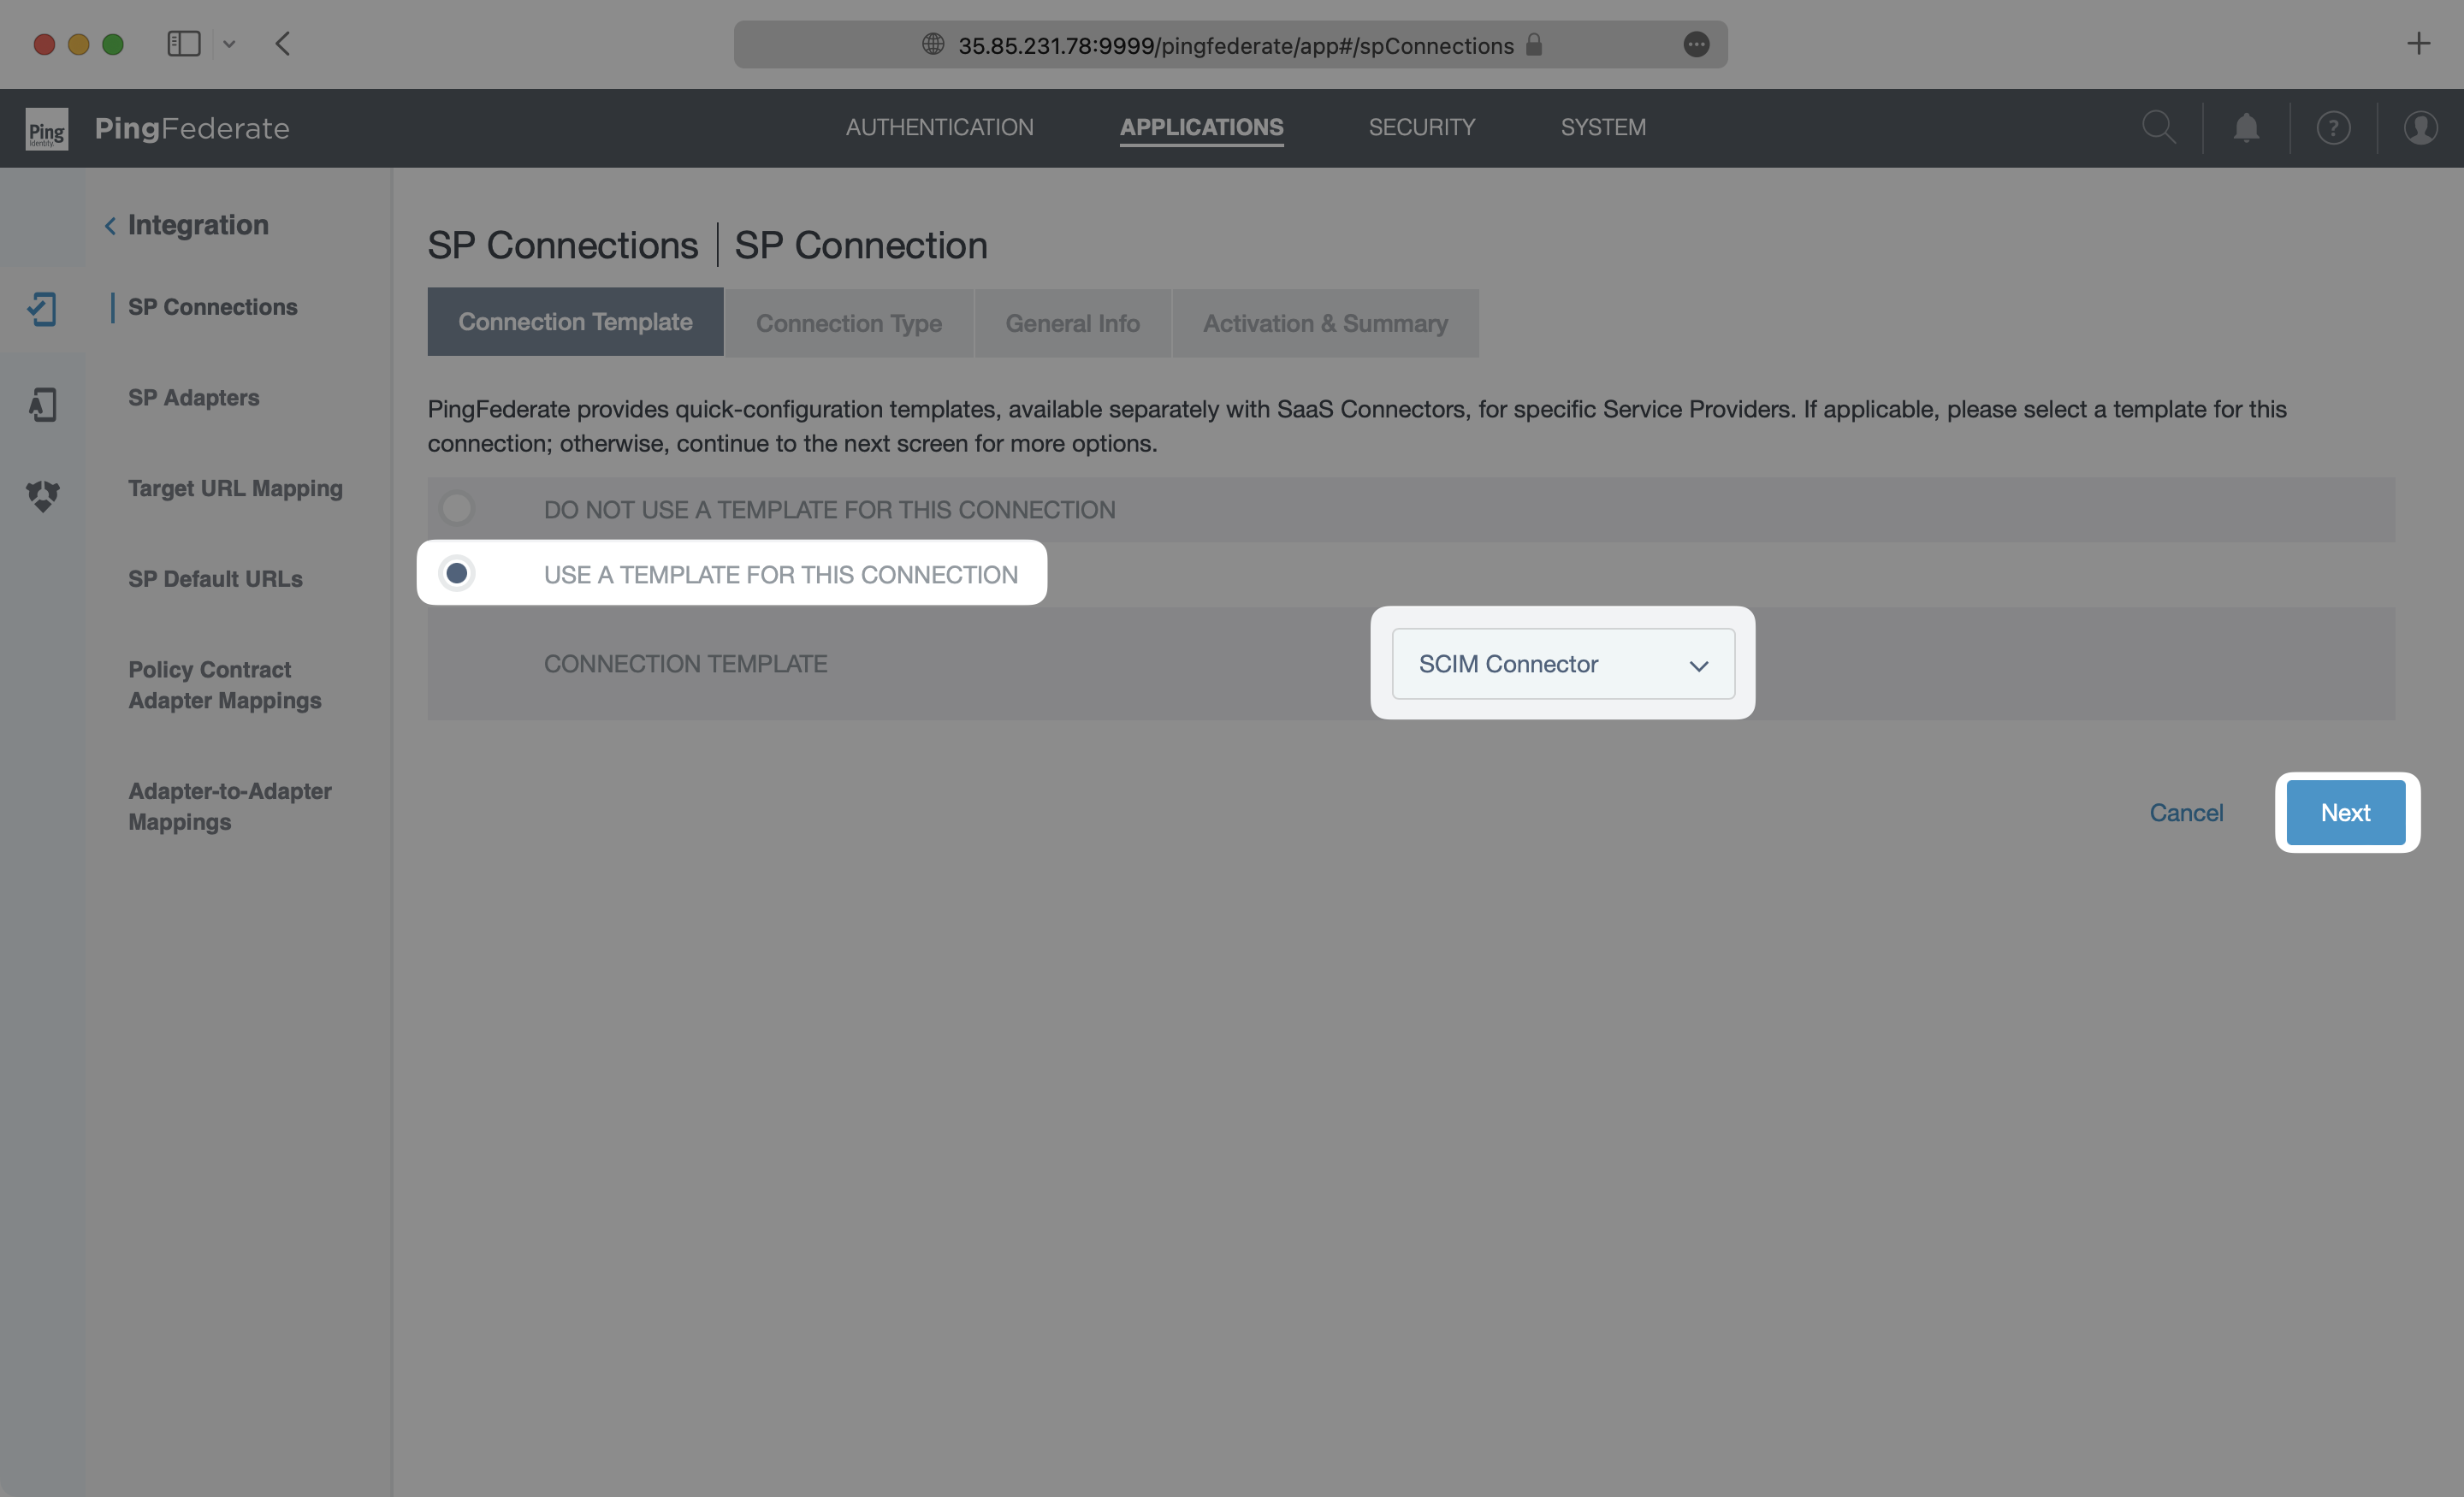 A screenshot showing how to select the SCIM Connector template in PingFederate.